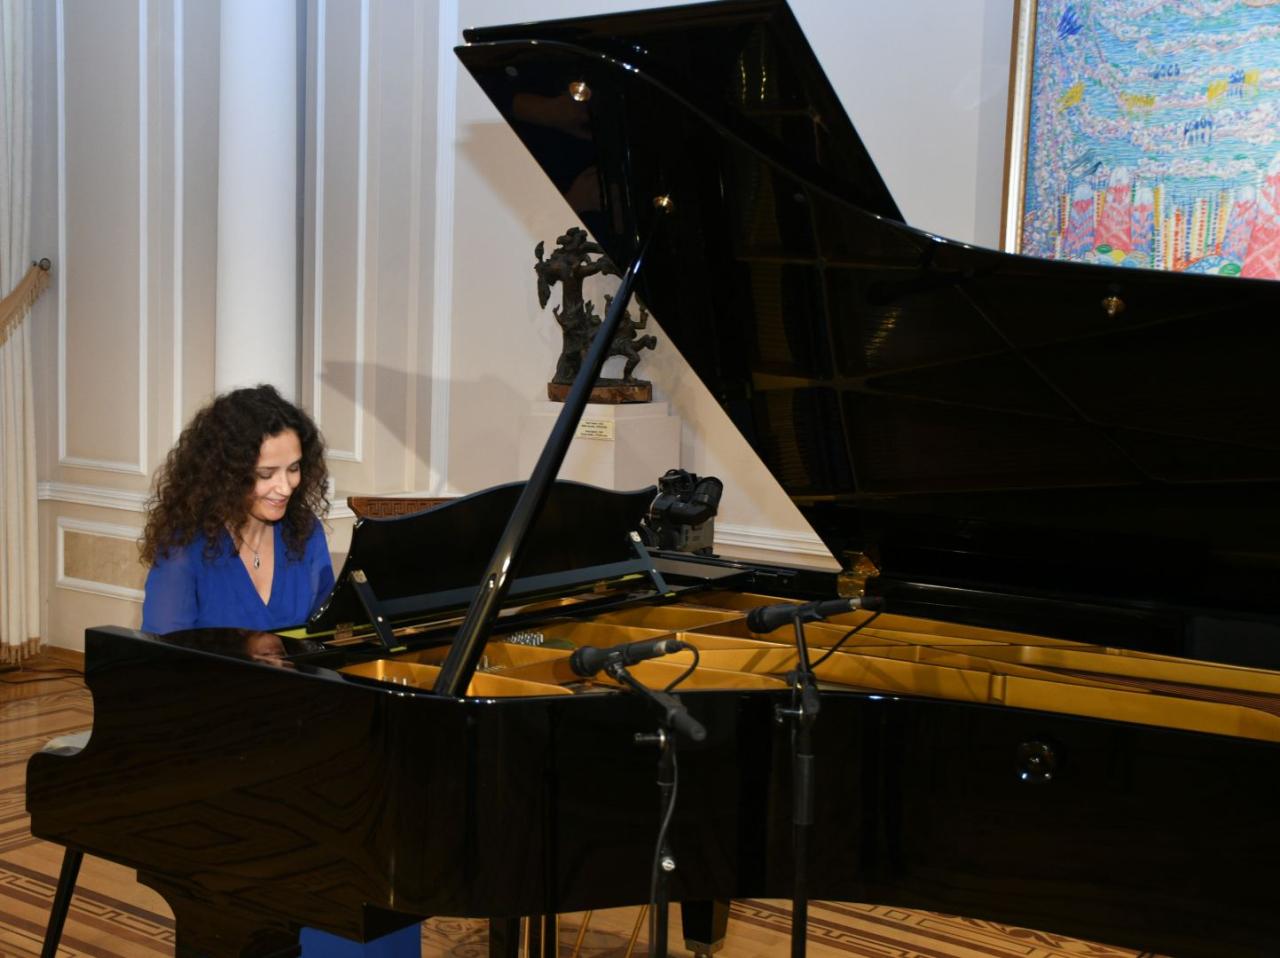 Classic music sounds at National Art Museum [PHOTO/VIDEO]